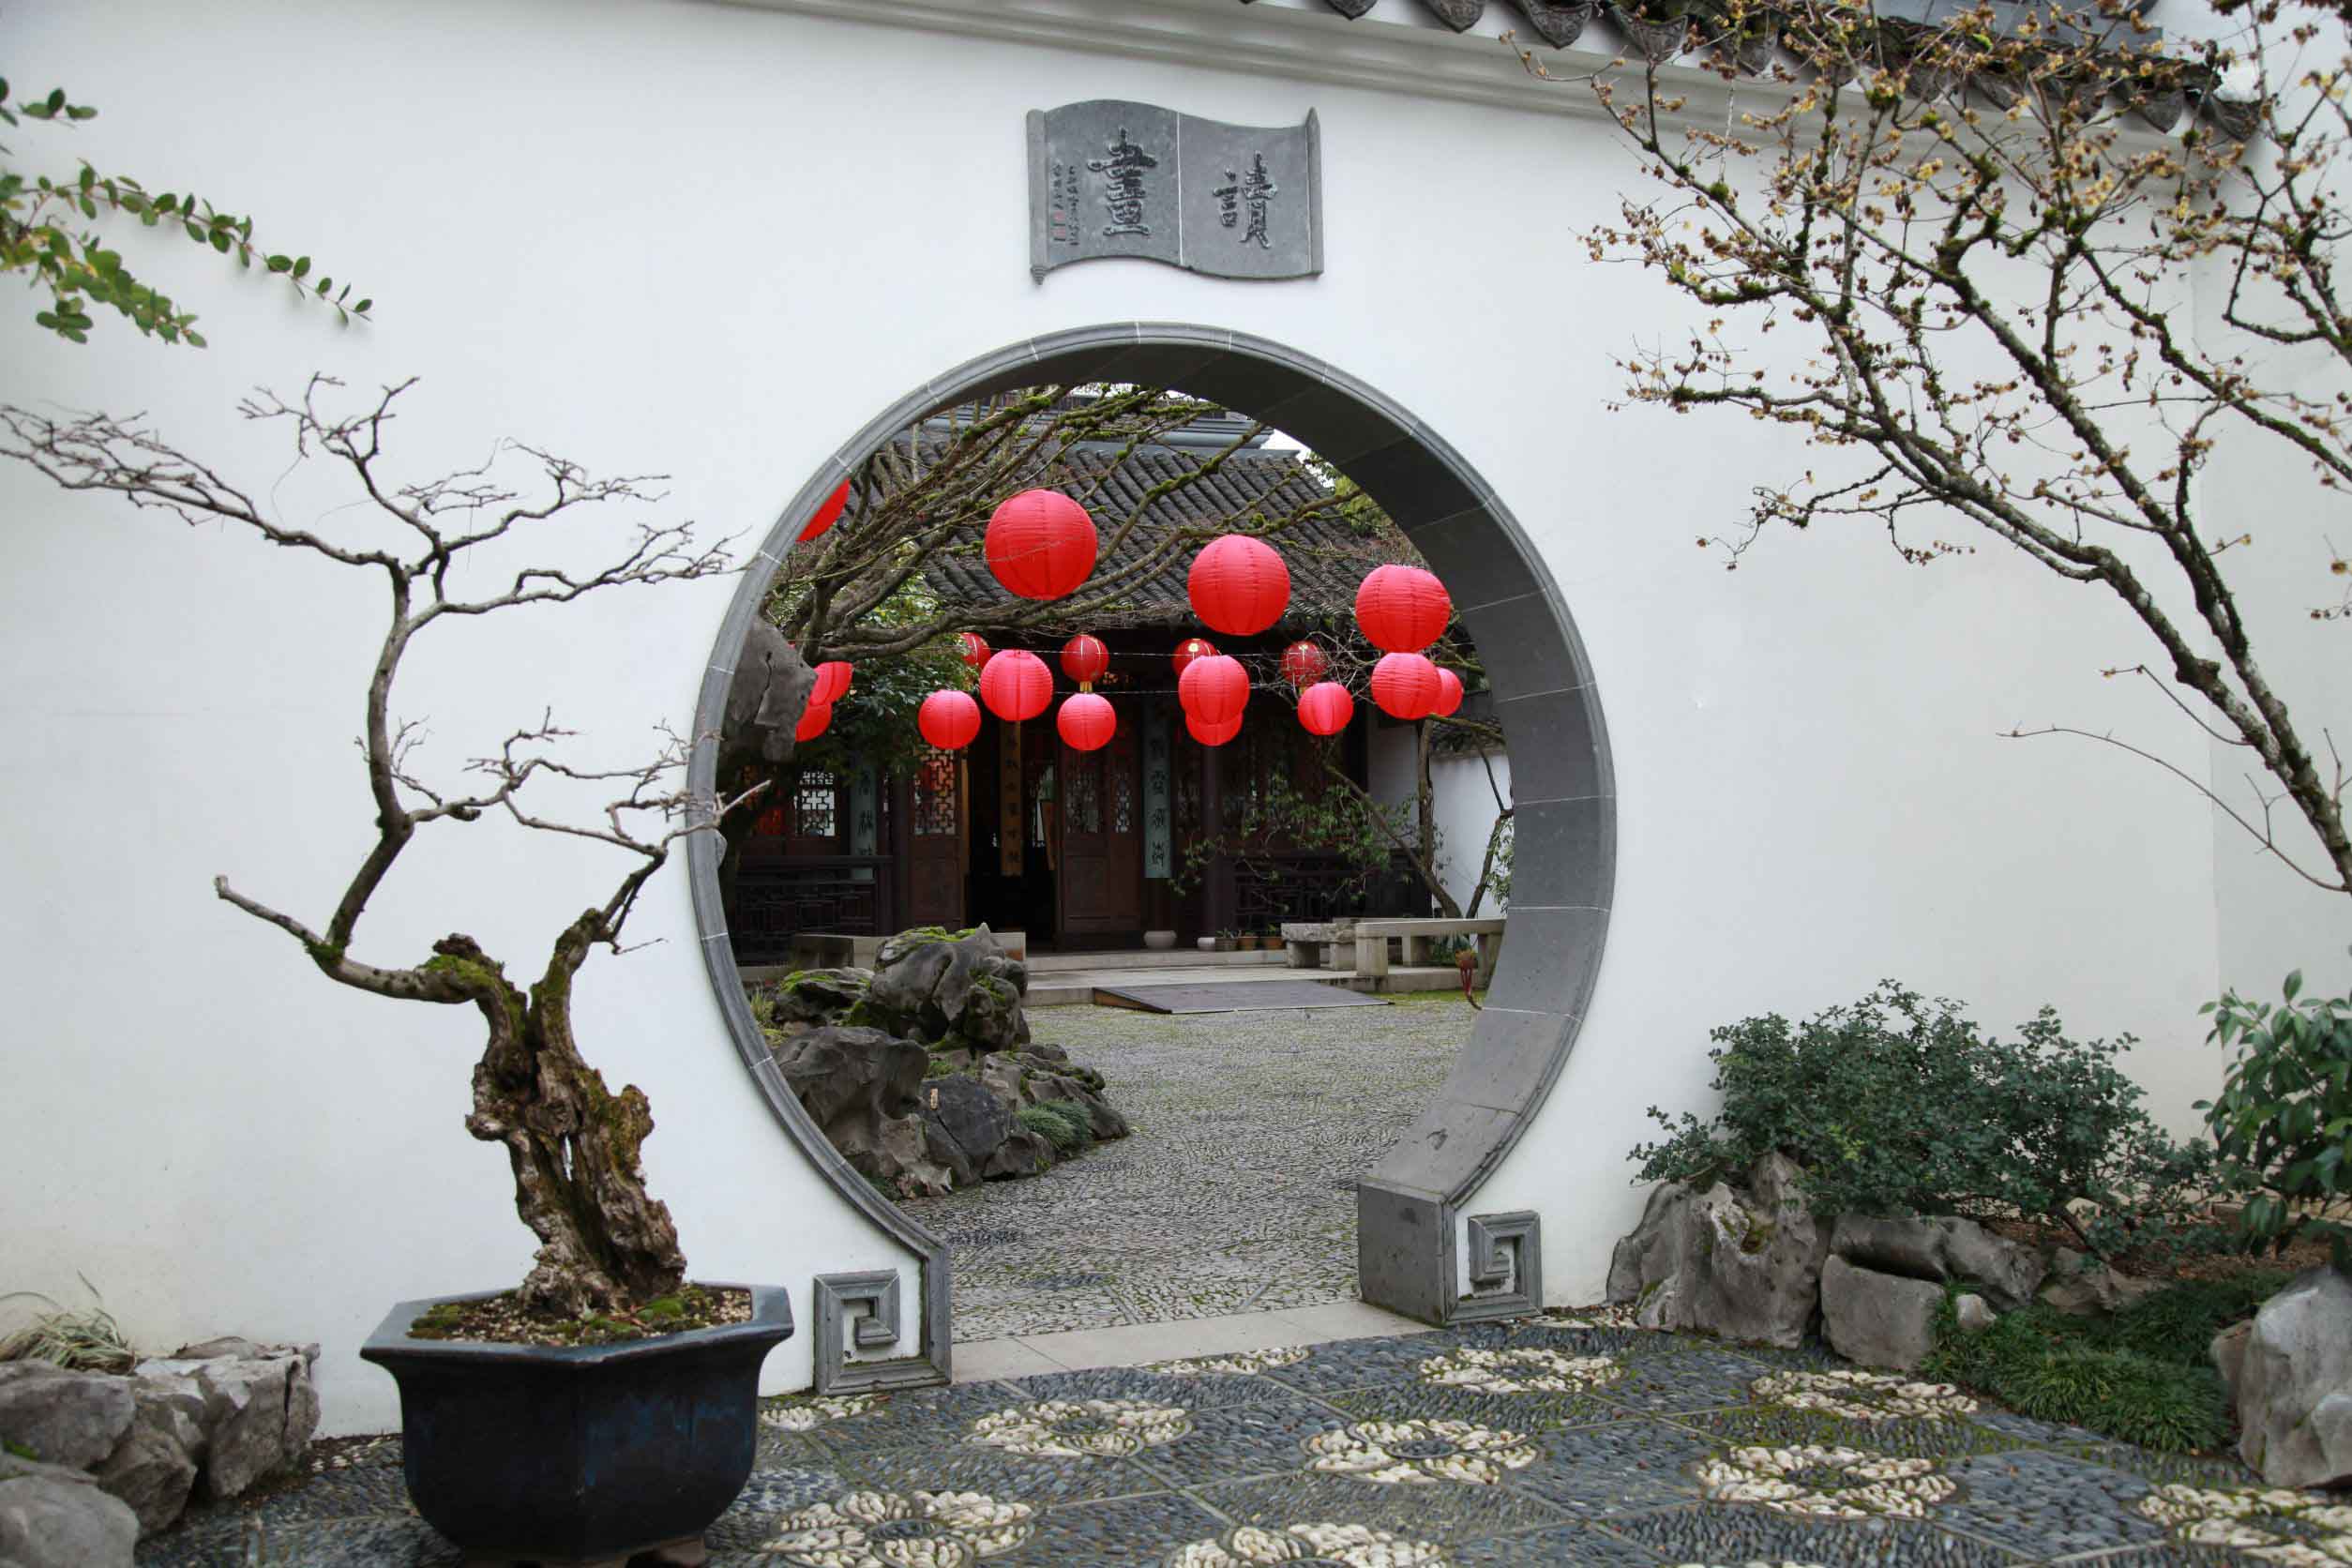 Lanterns hanging over the courtyard entrance